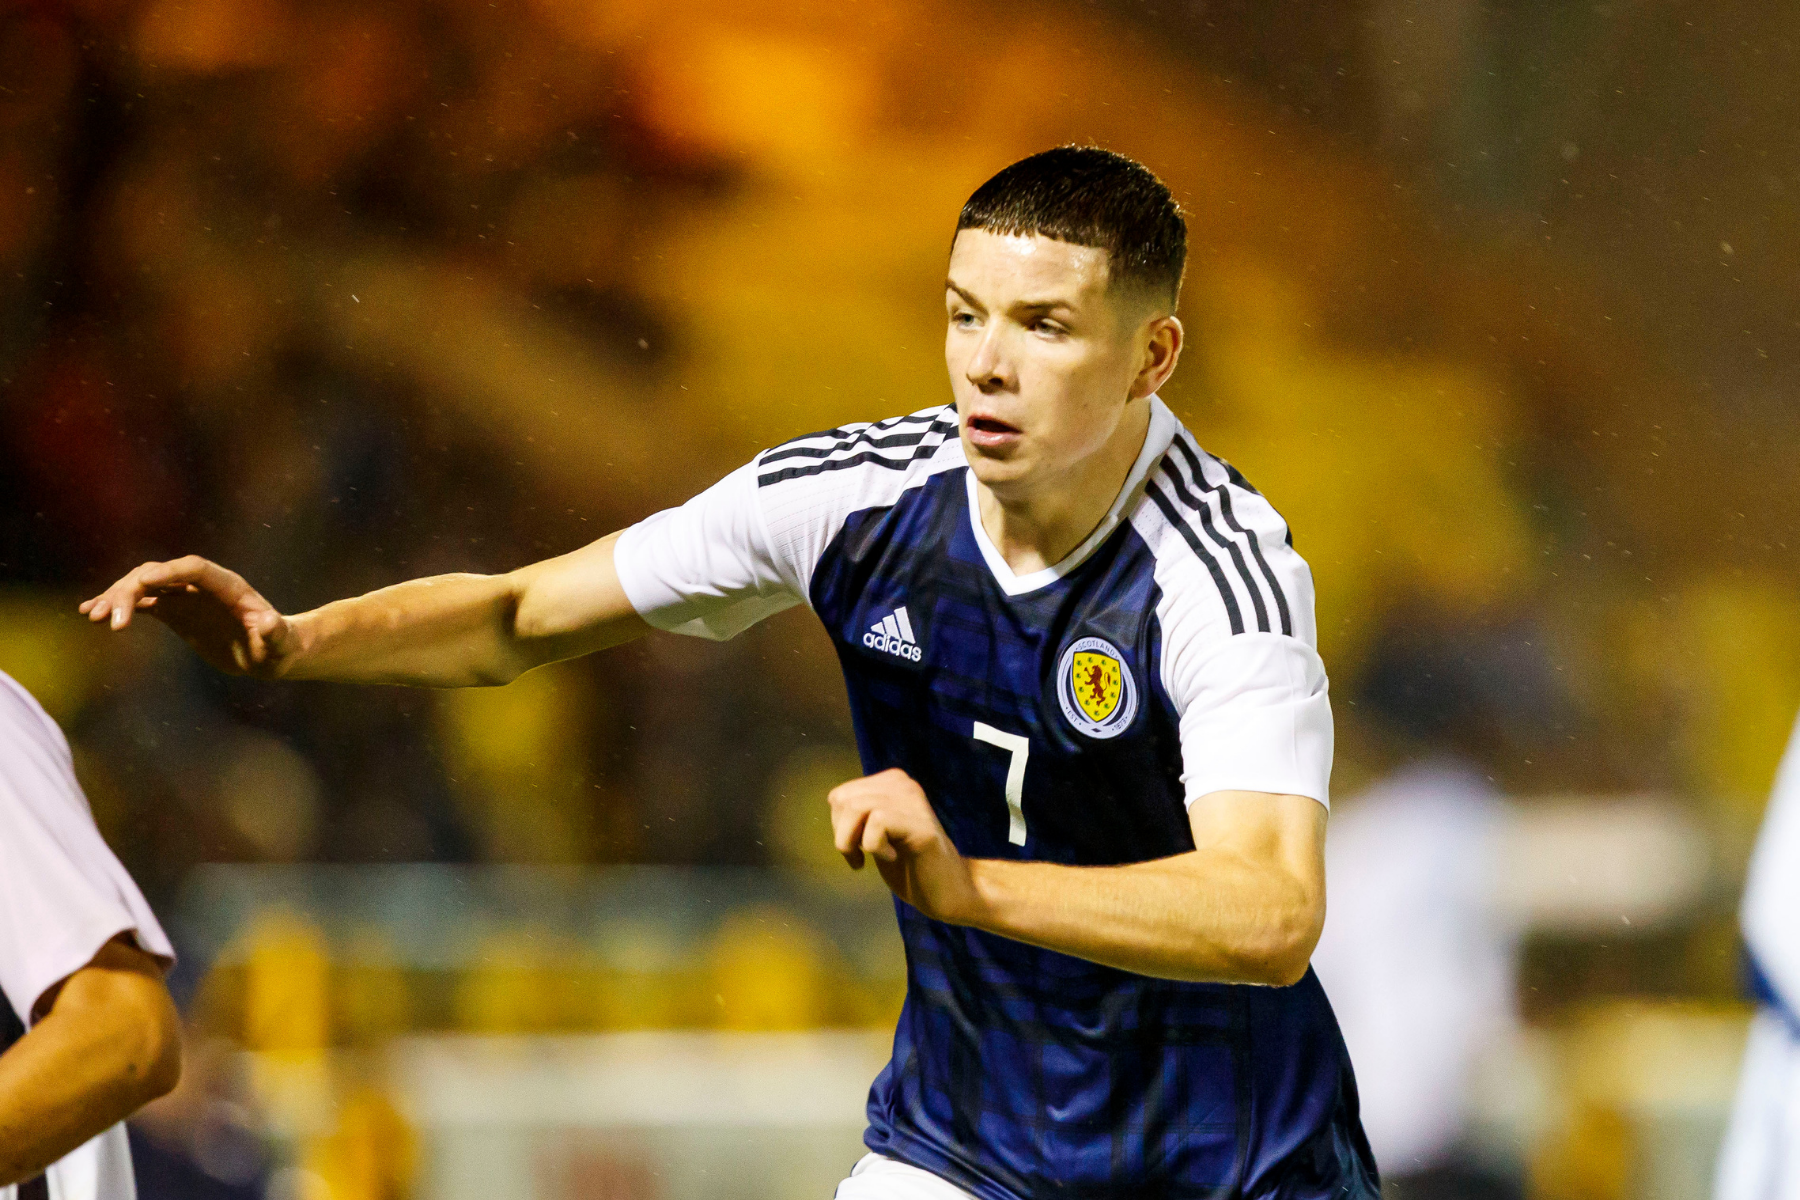 St Johnstone take former Arsenal midfielder on trial after Norwich exit